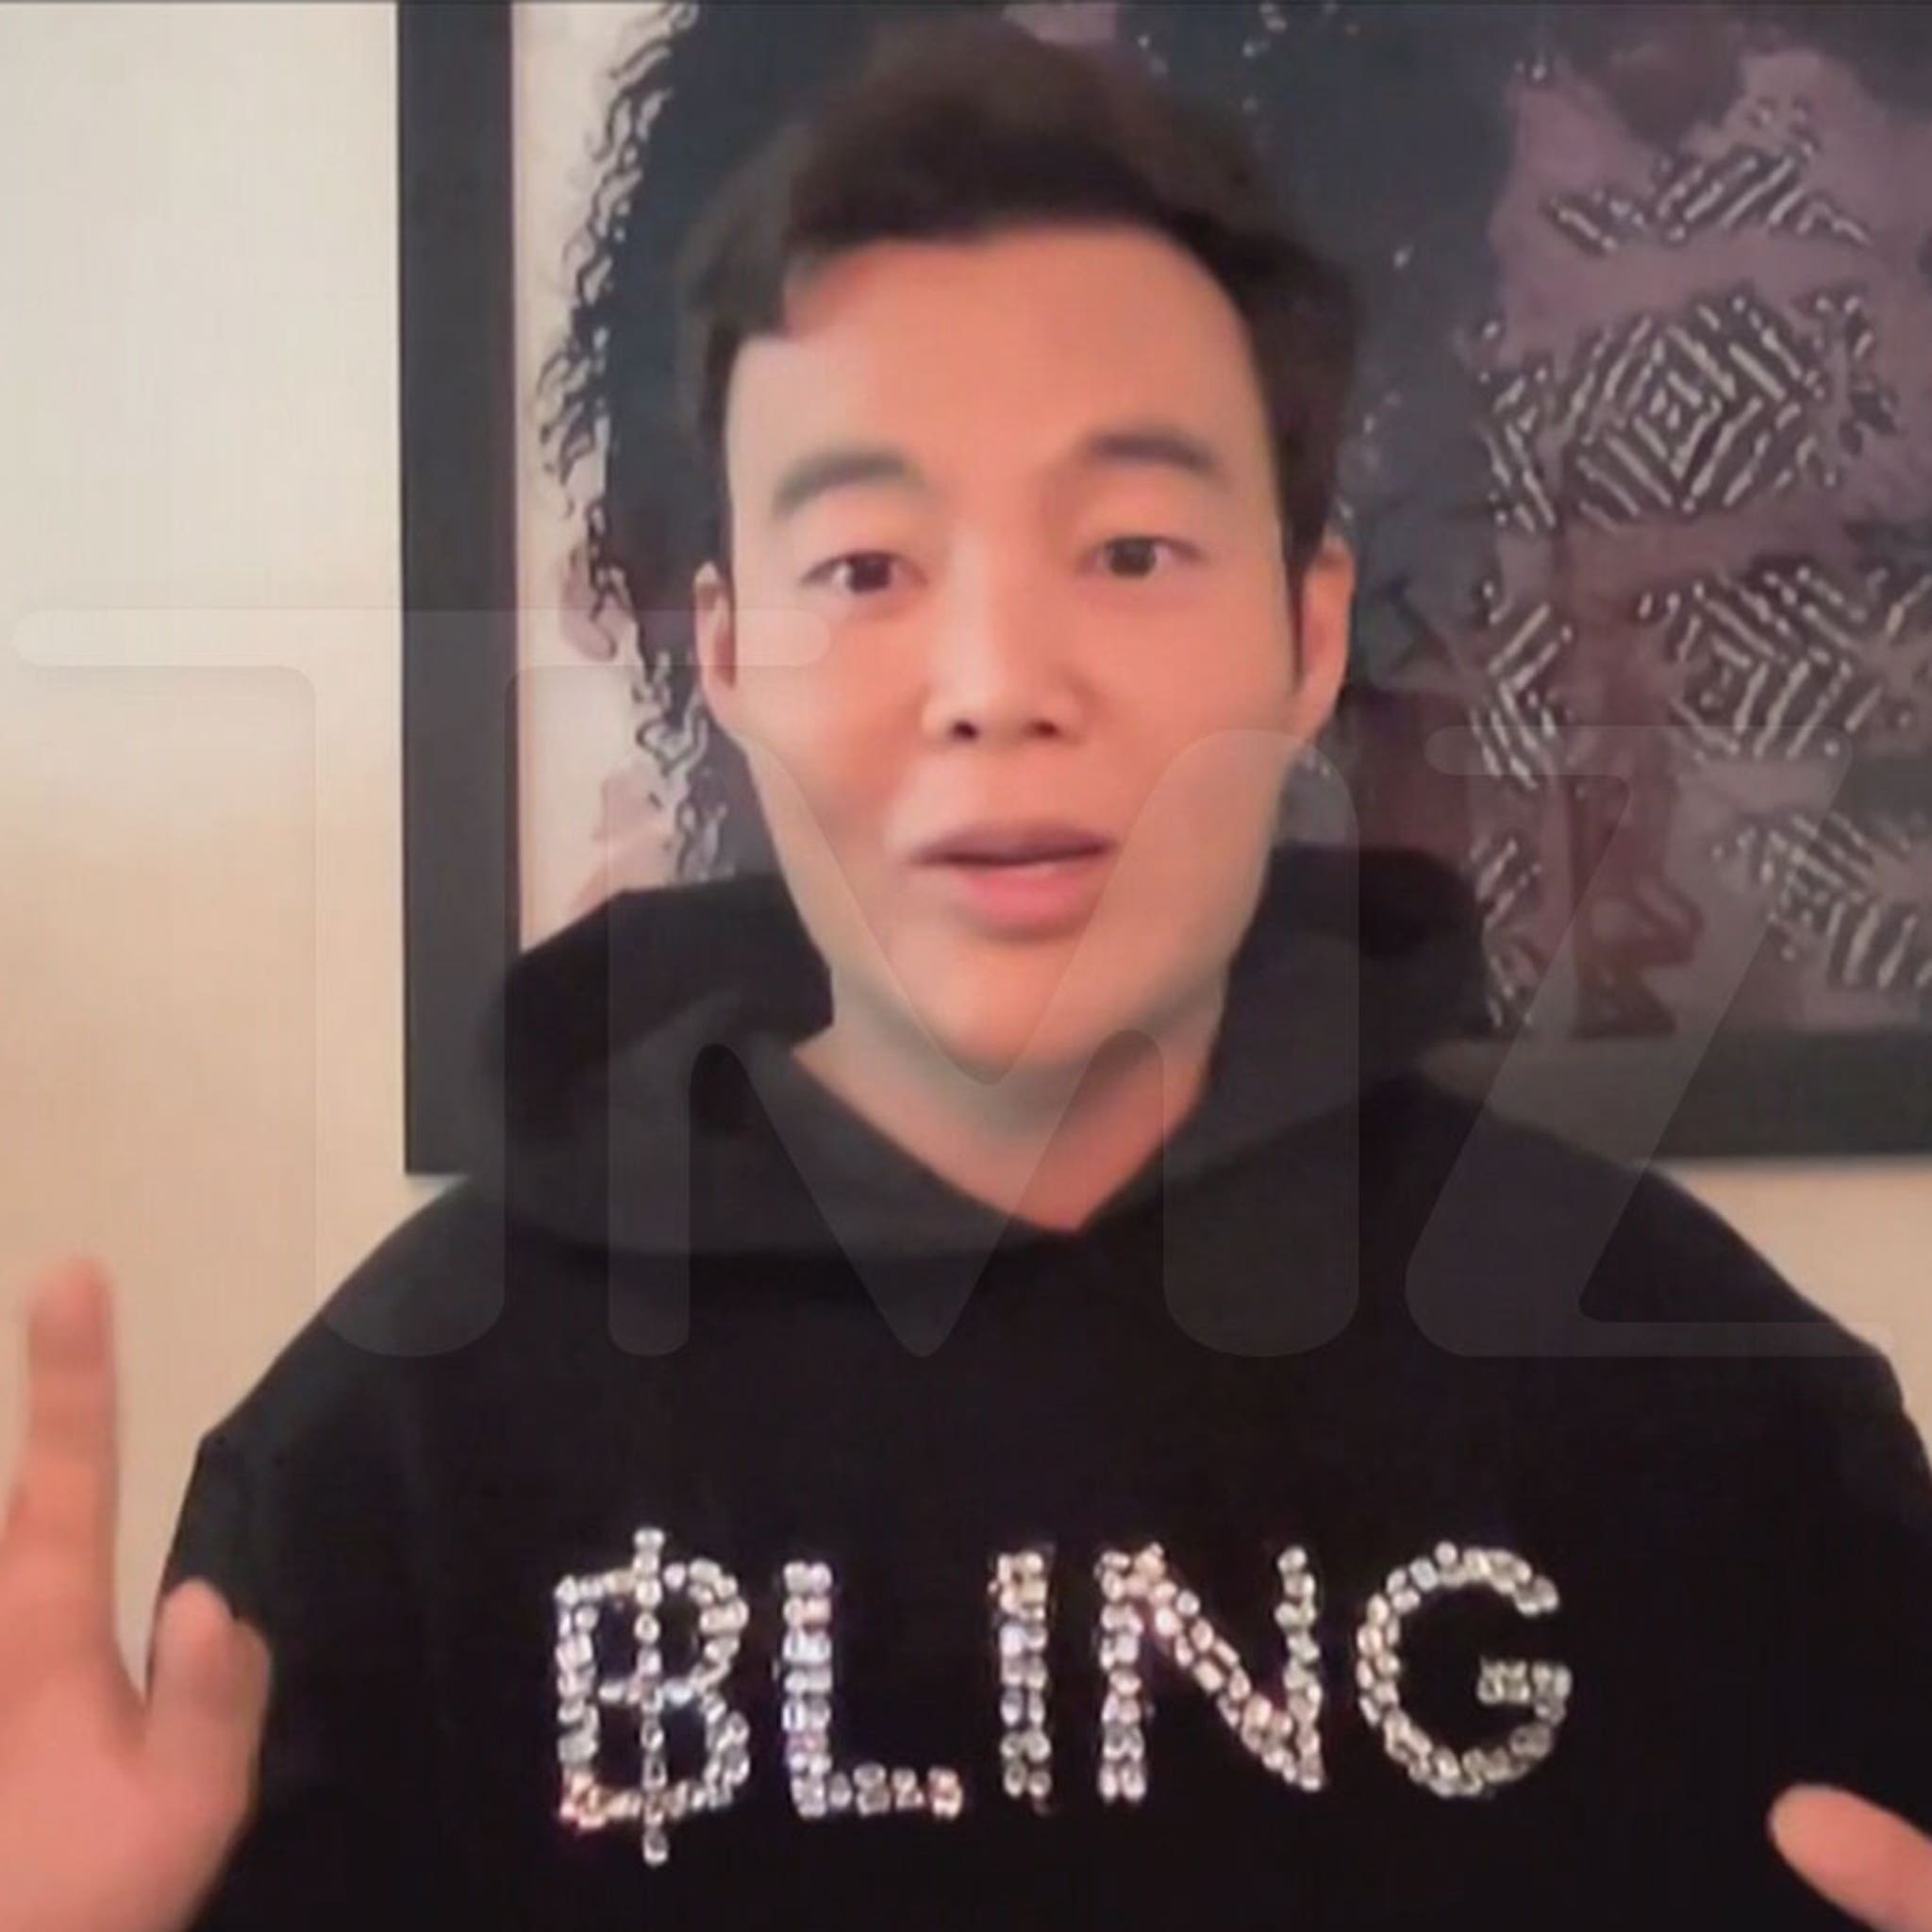 Bling Empire Star Kane Lim Launches a Streetwear Line With a Charity Angle  - Bloomberg